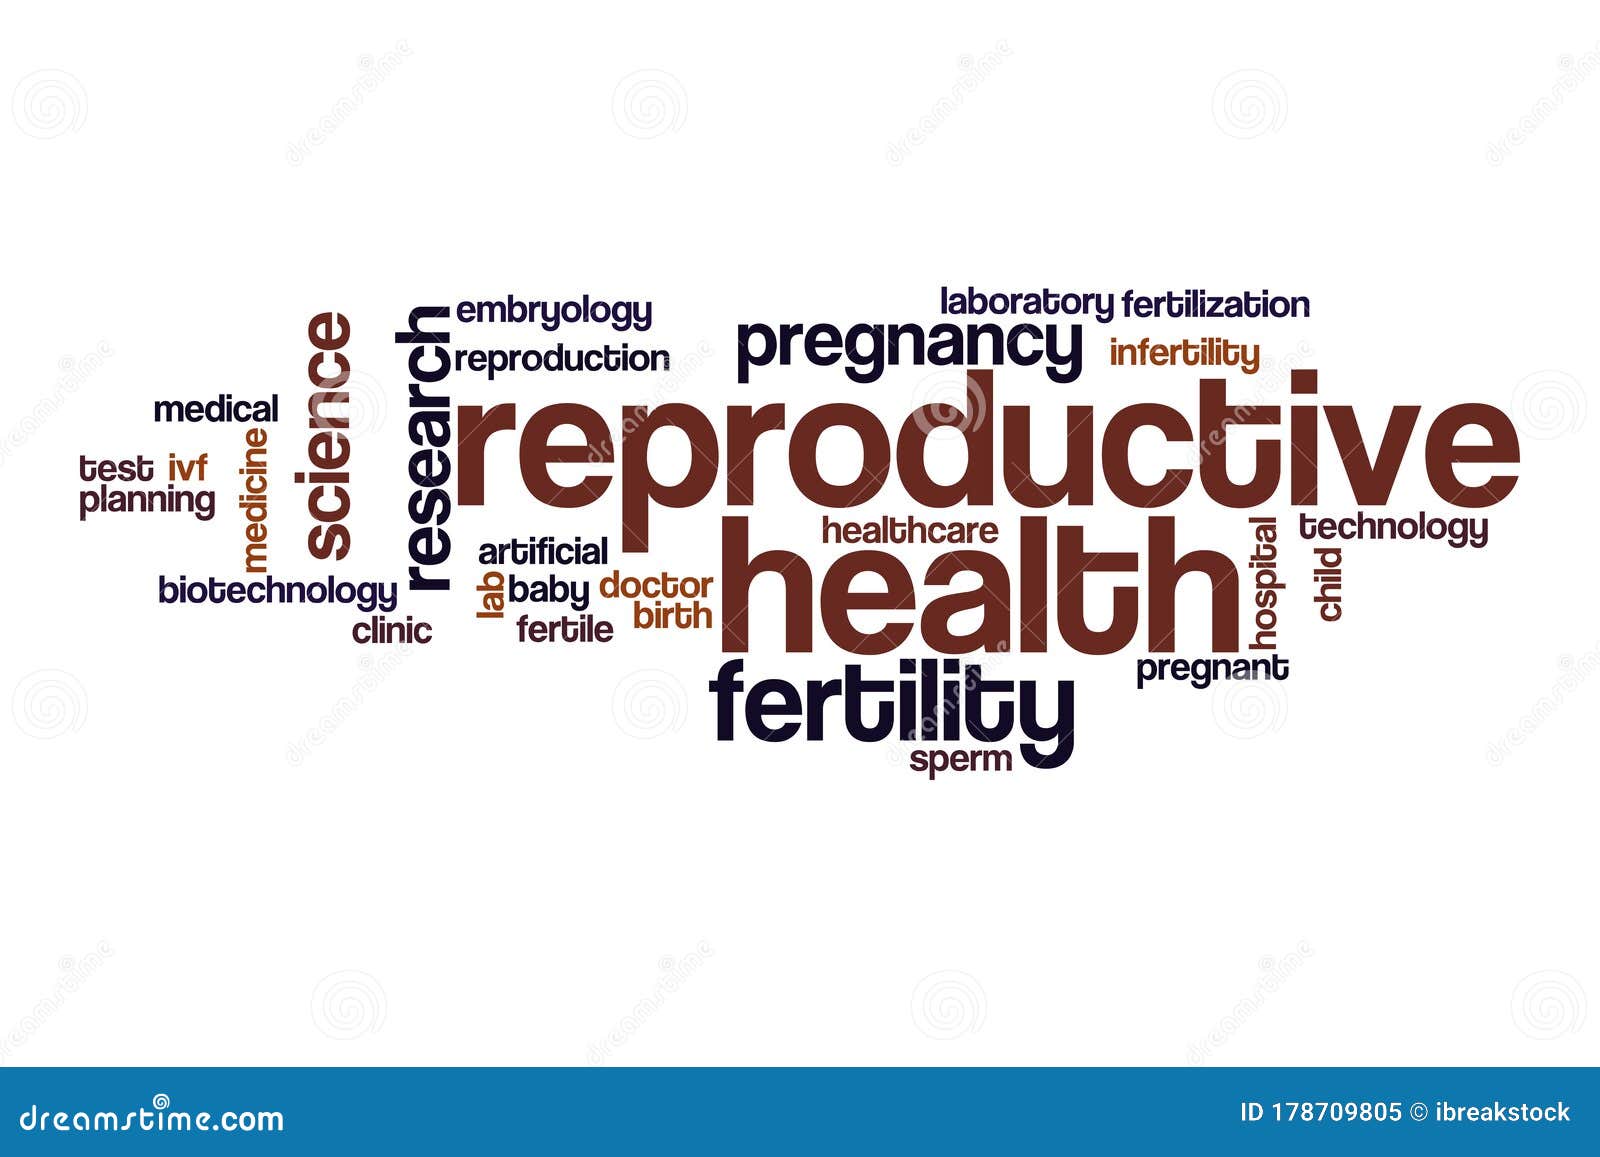 assignment on reproductive health